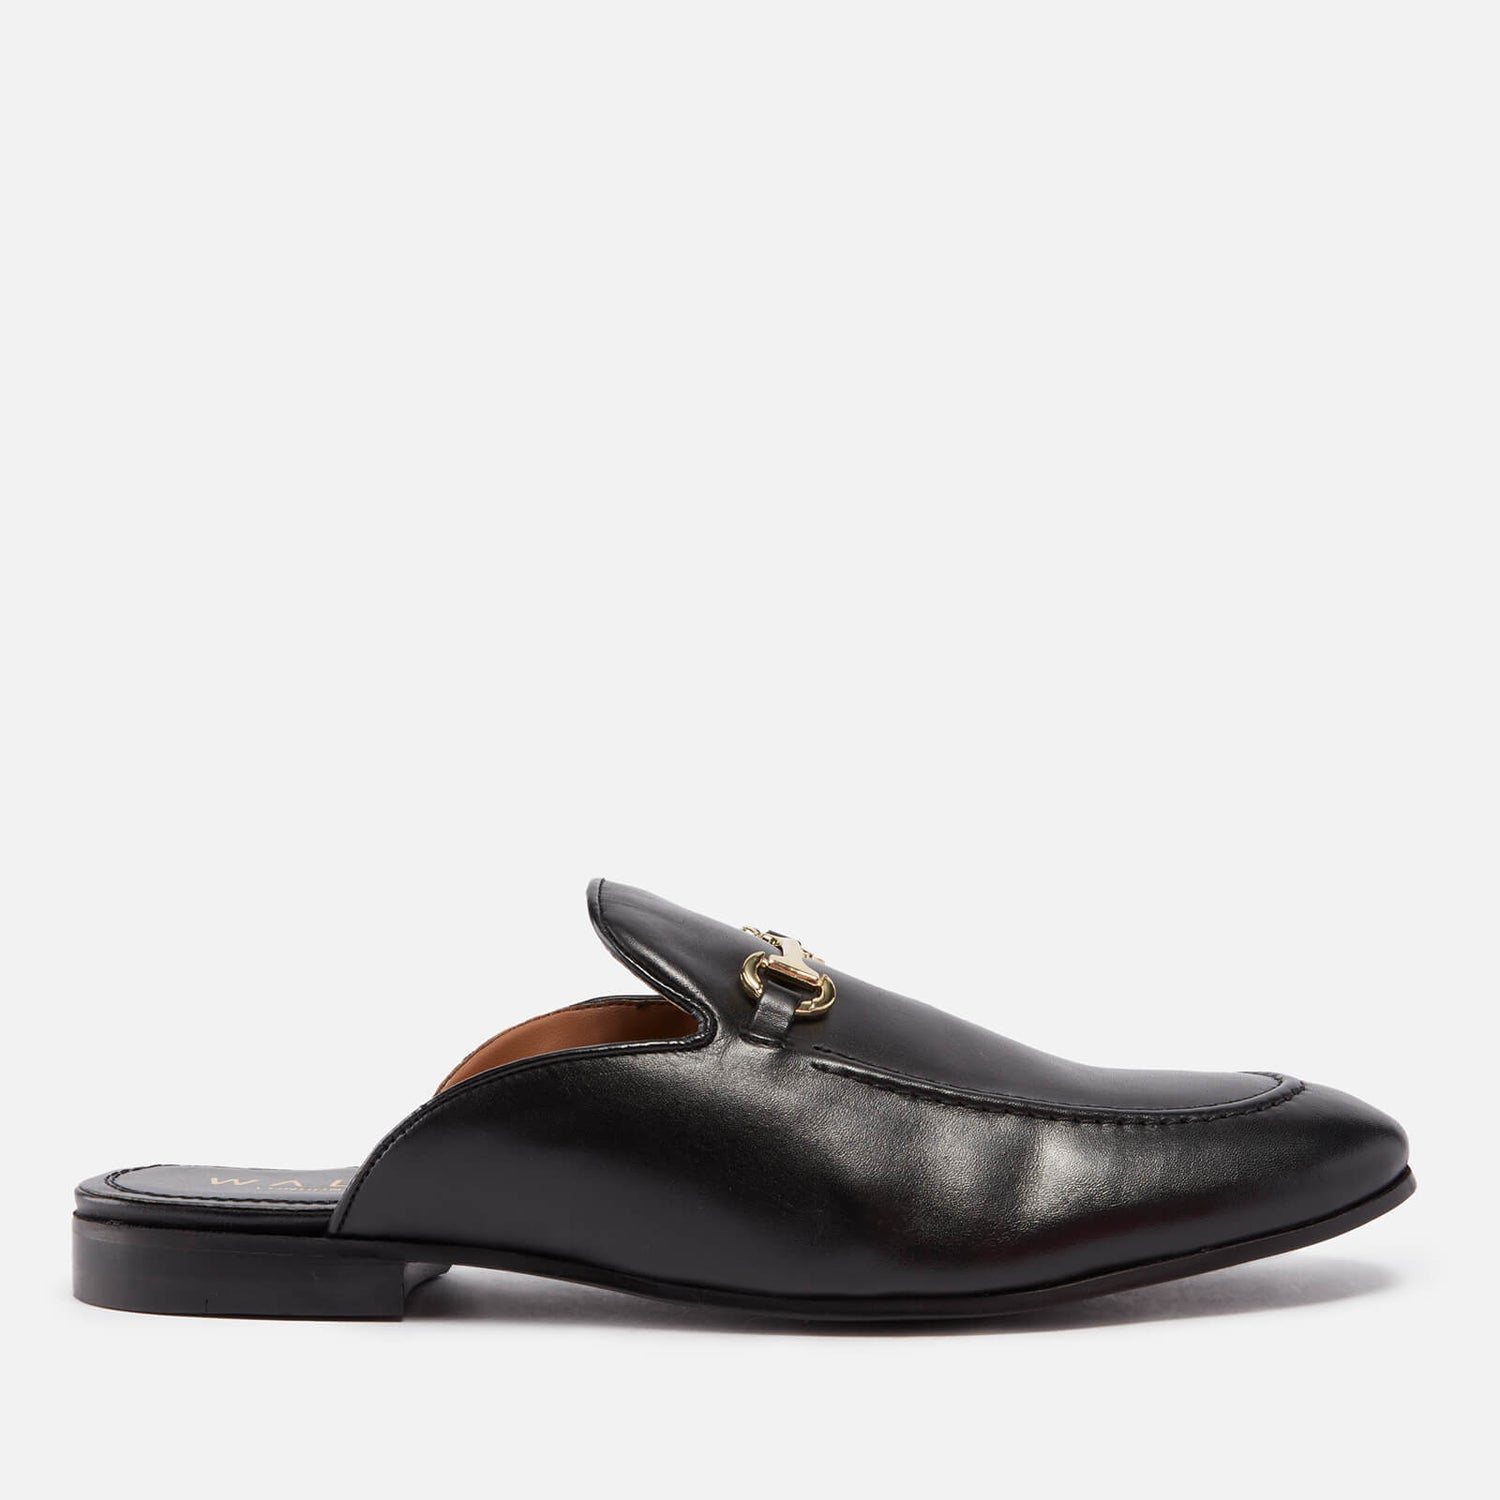 Walk London Terry Leather Mules - 7